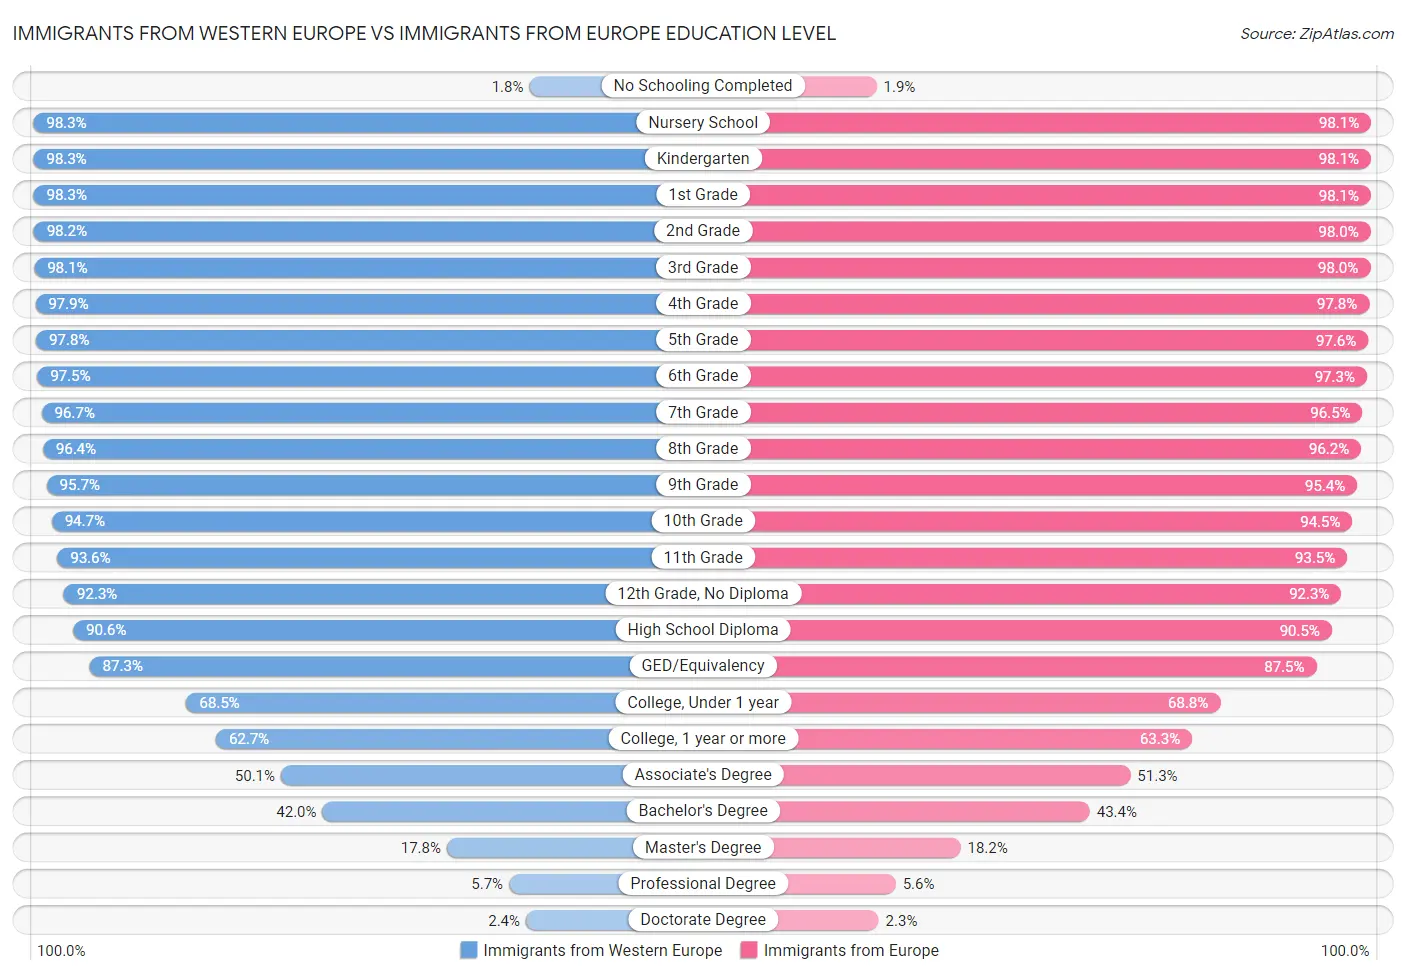 Immigrants from Western Europe vs Immigrants from Europe Education Level